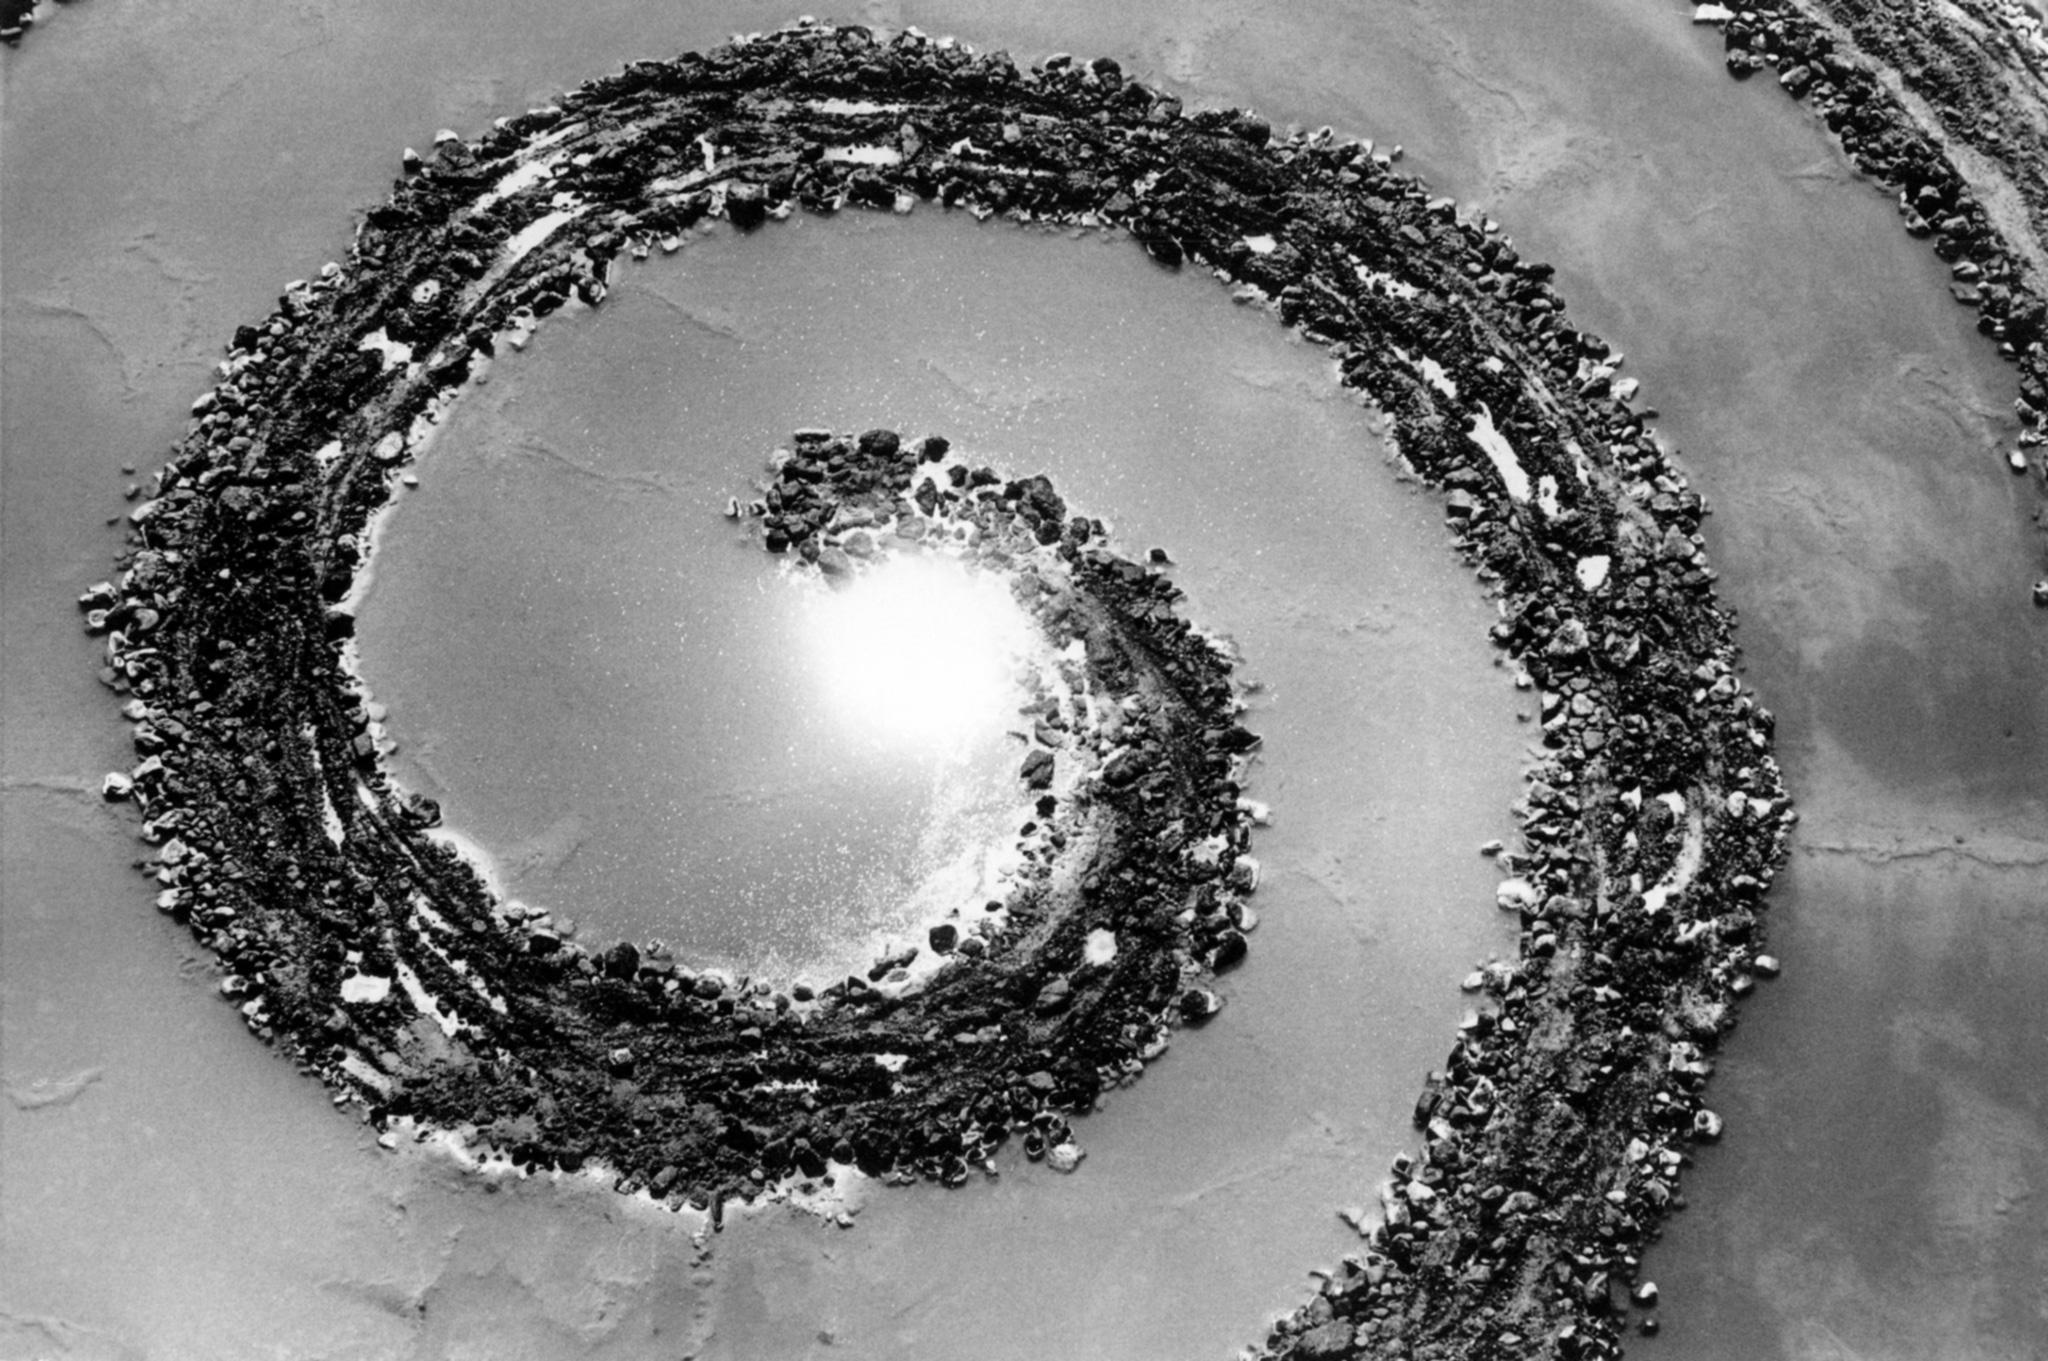 aerial black and white image of a spiral of rocks and earth in water. Sun reflected in water.